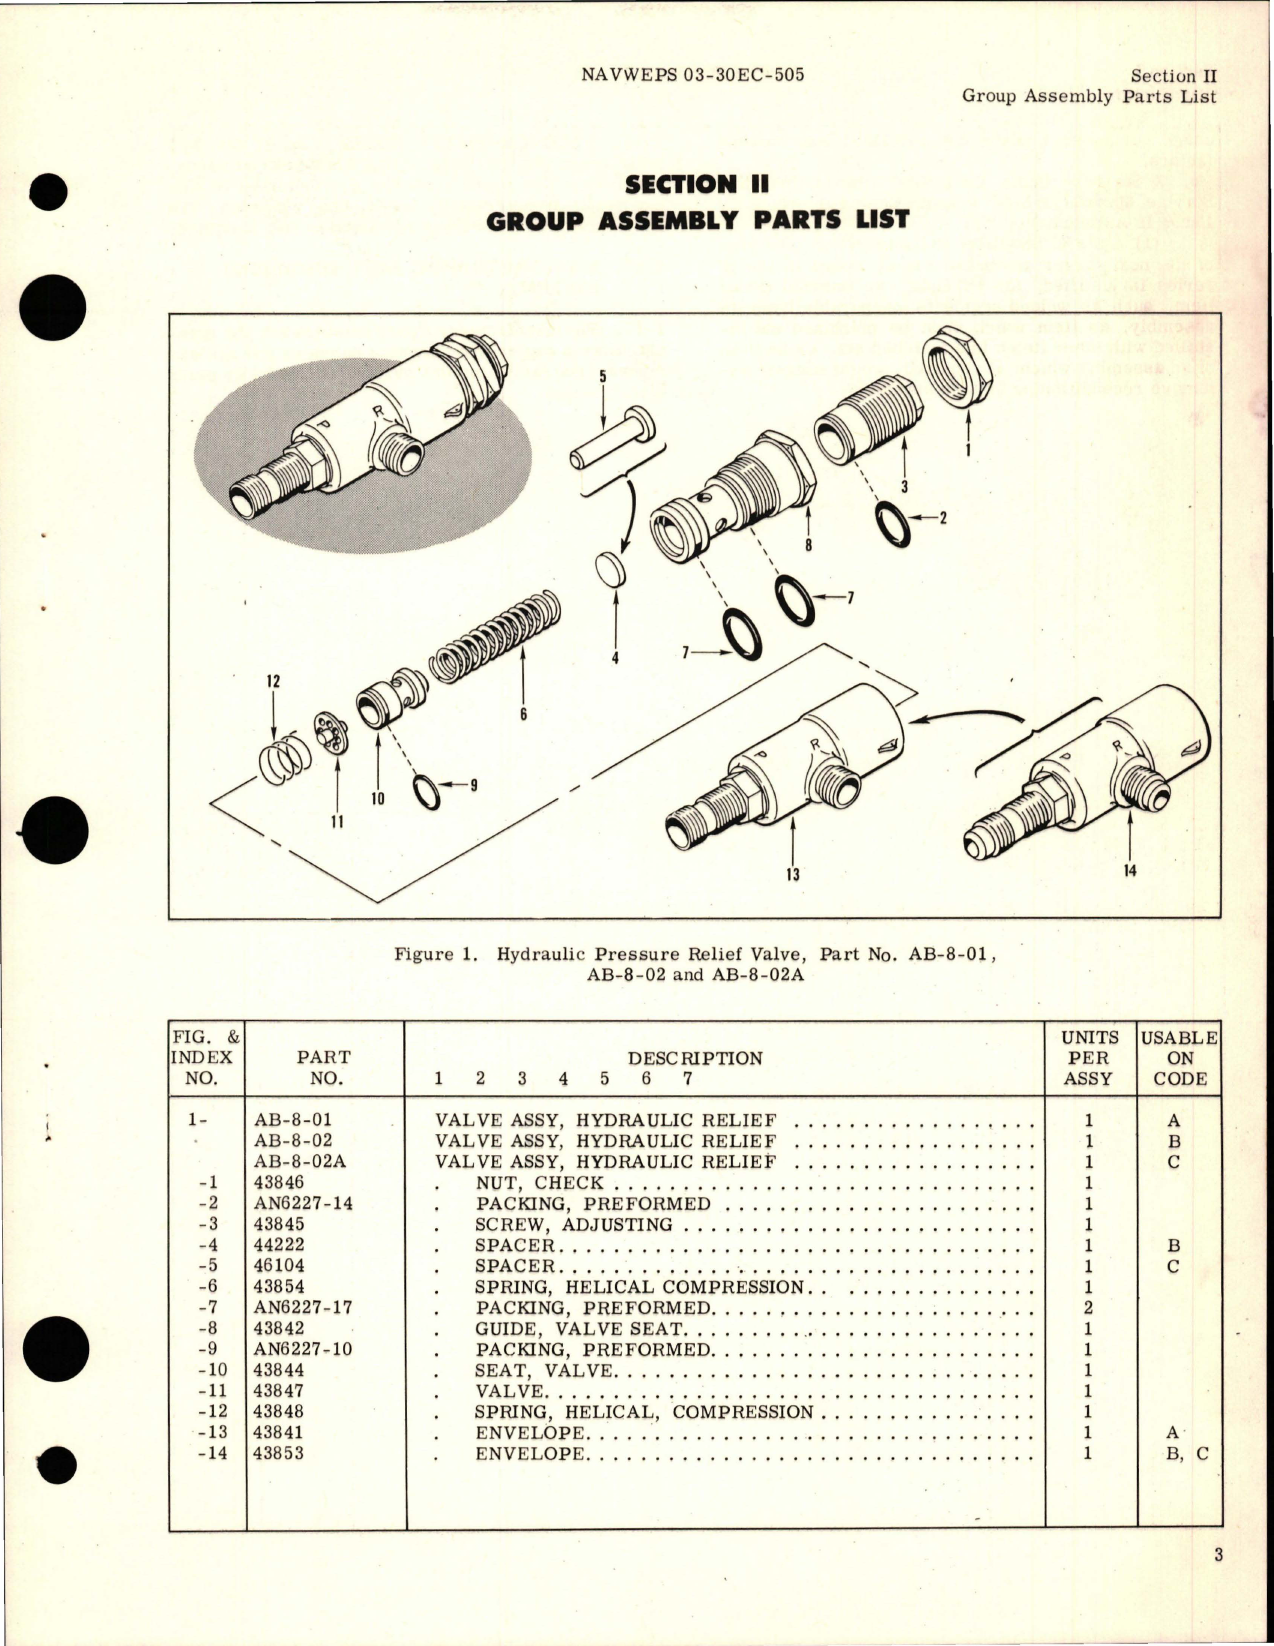 Sample page 5 from AirCorps Library document: Illustrated Parts Breakdown for Hydraulic Pressure Relief Valves - Parts AB-8-01, AB-8-02, AB-8-02A, AB-8-03, and AB-68-04